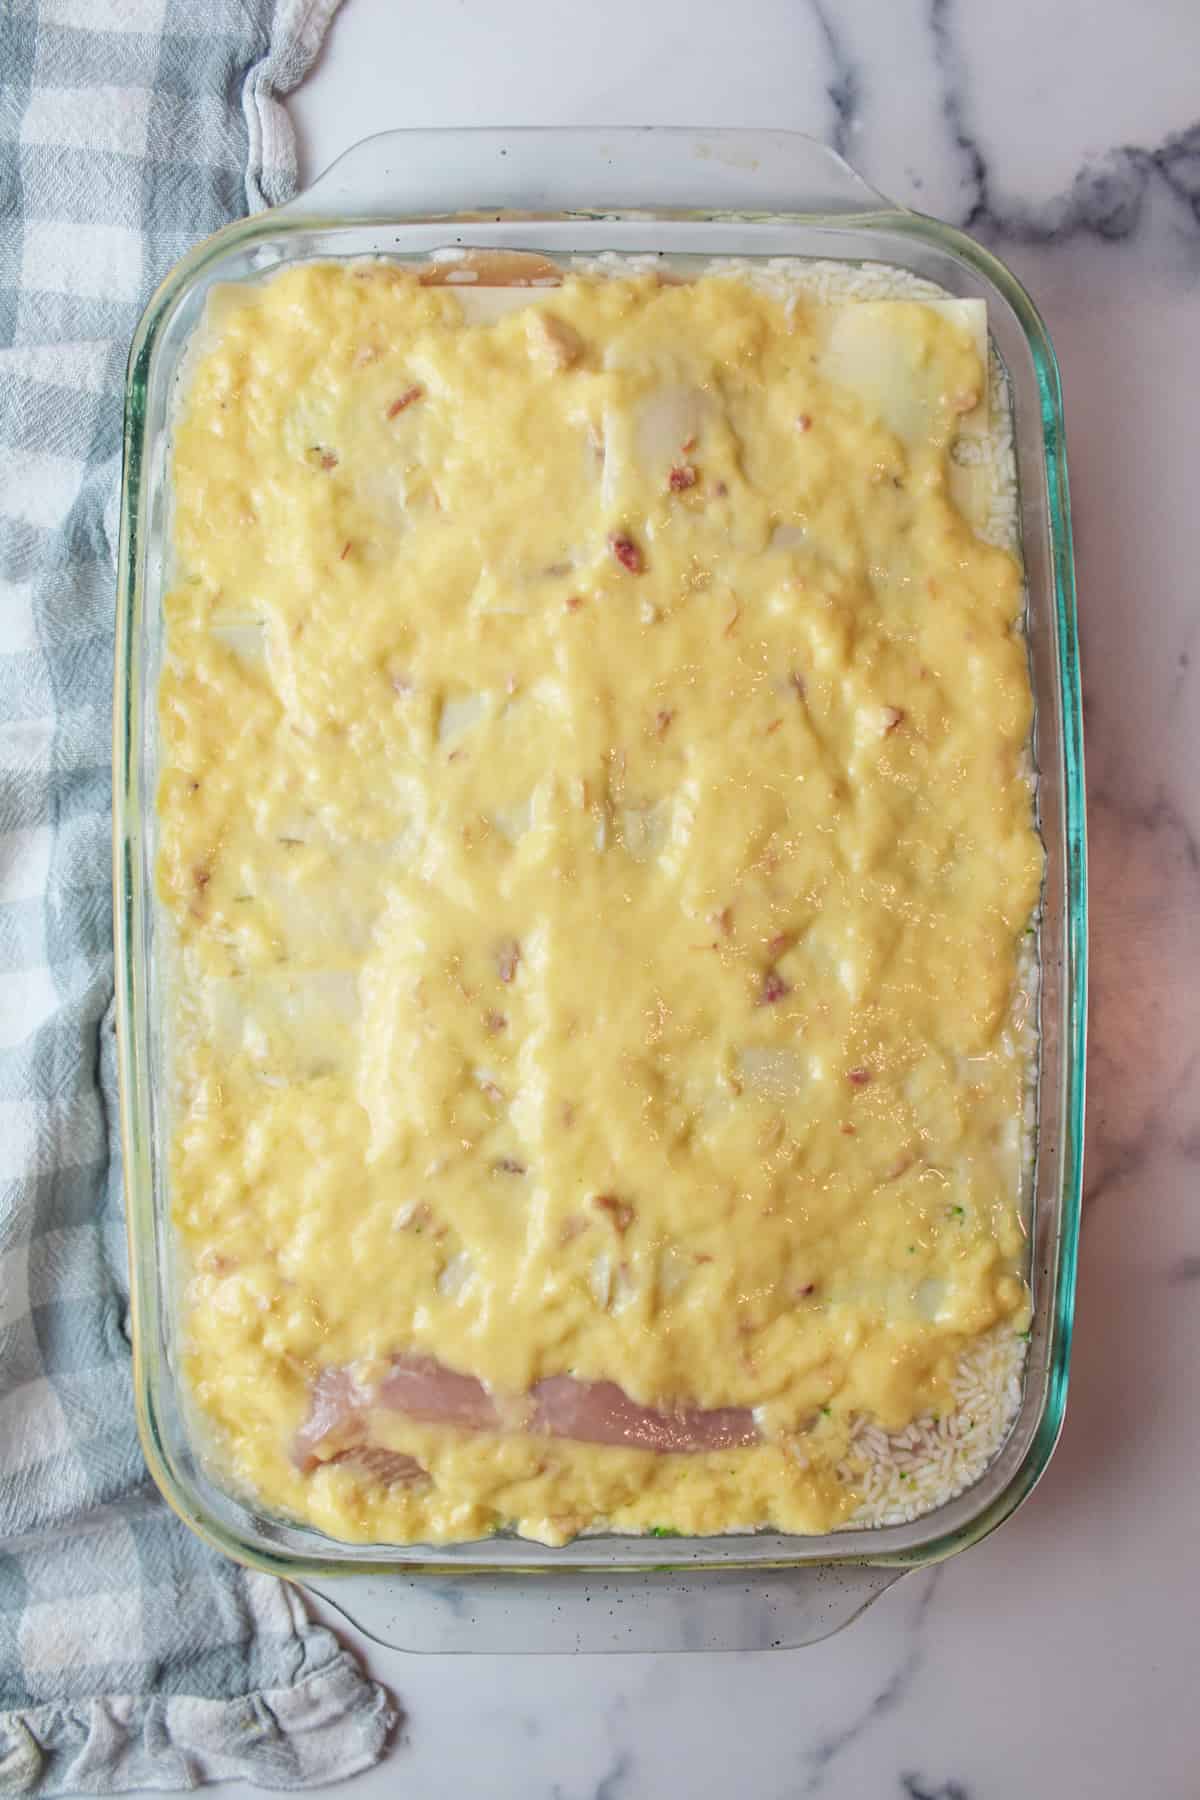 condensed soup spread over swiss cheese slices in baking dish with rice and chicken.